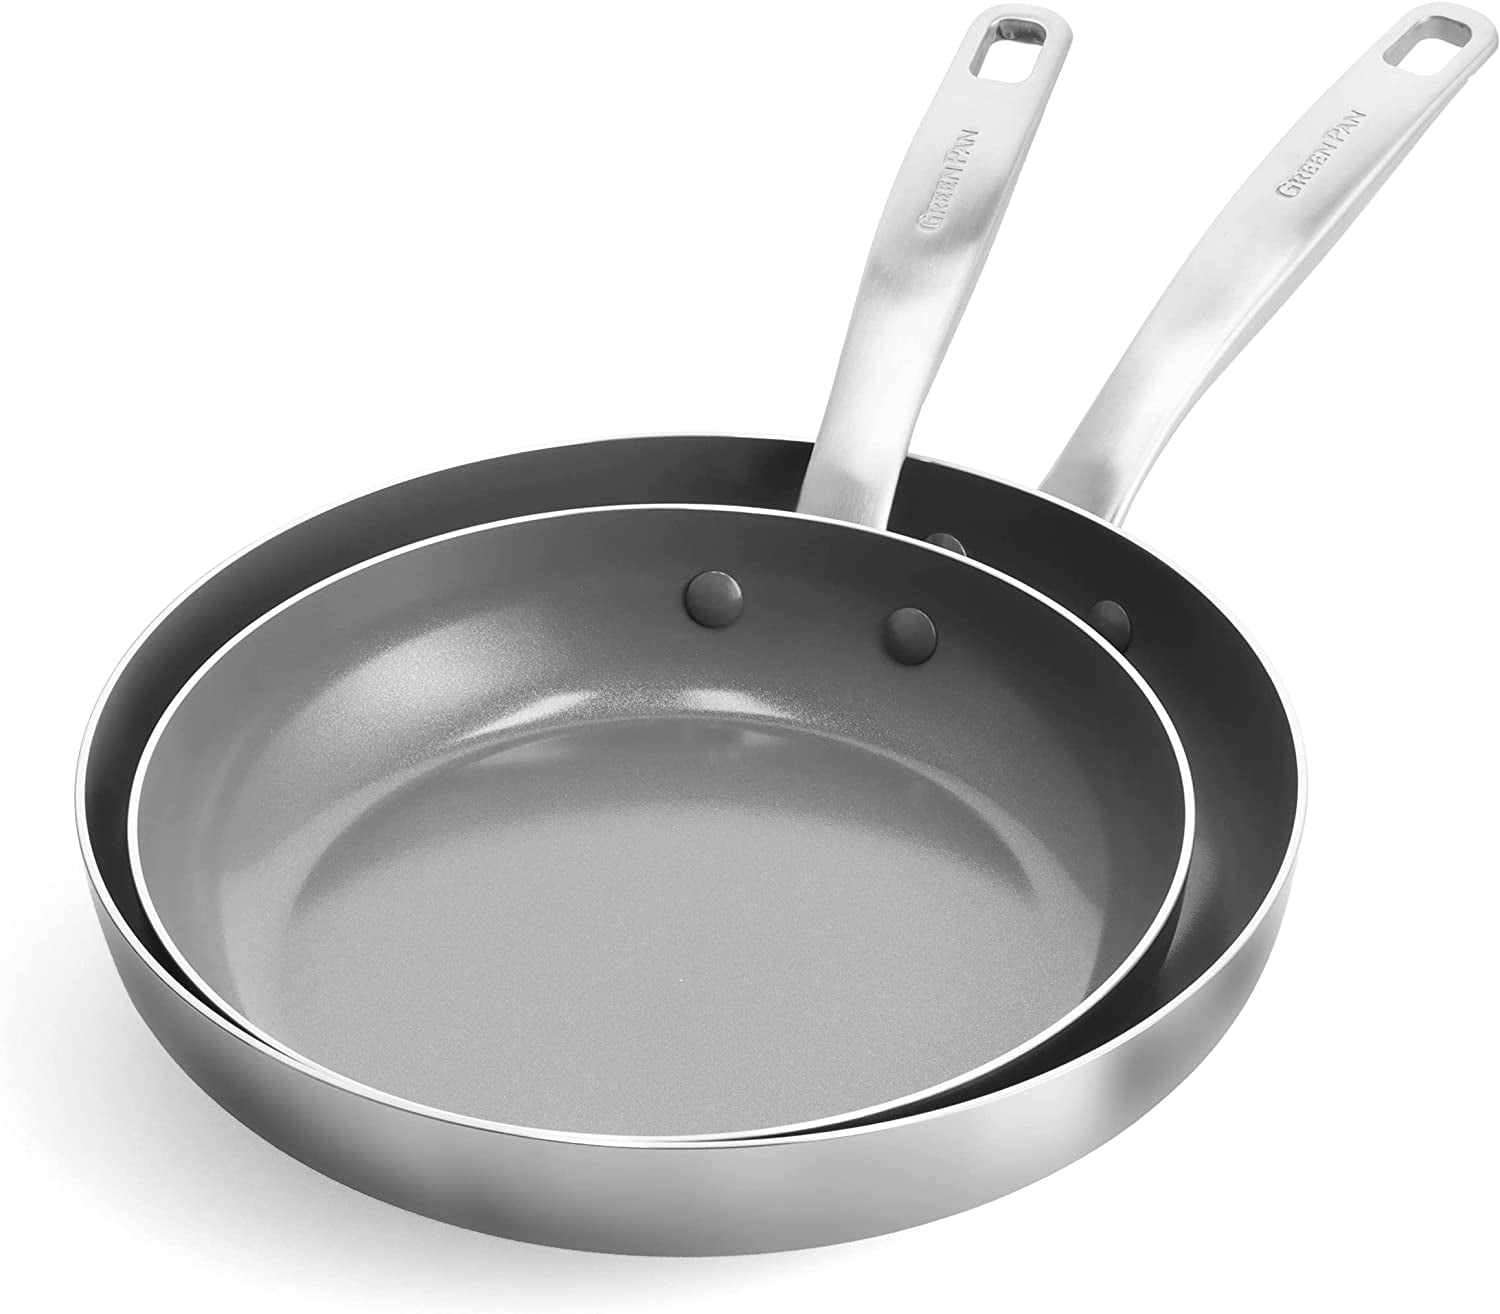 XCYWLM Chatham Tri-Ply Stainless Steel Healthy Ceramic Nonstick 8